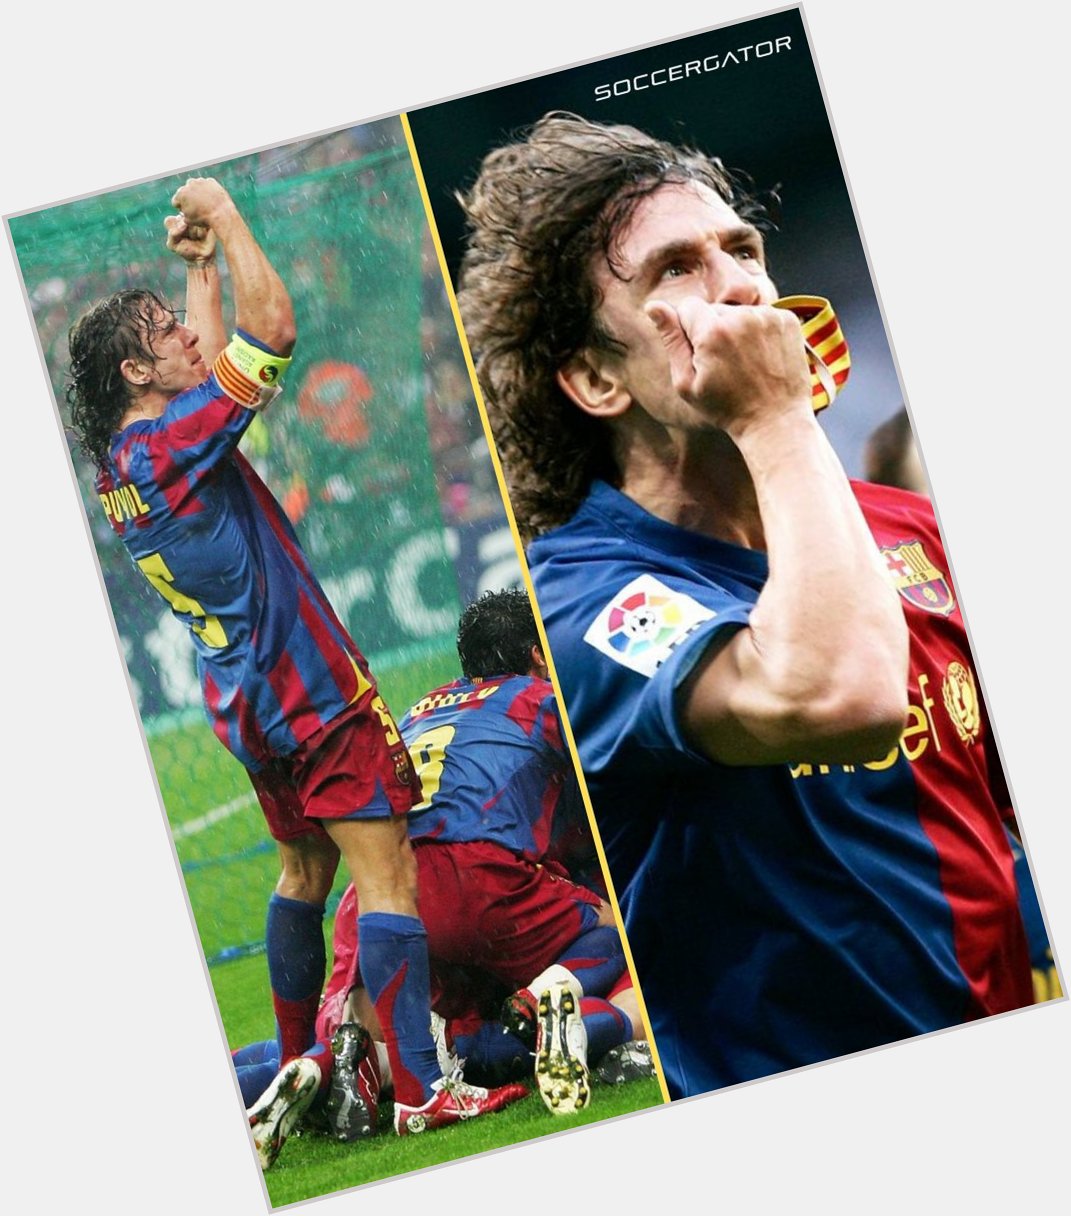 Happy 42nd birthday to one-club man, Carles Puyol, who always gave % on the pitch!  